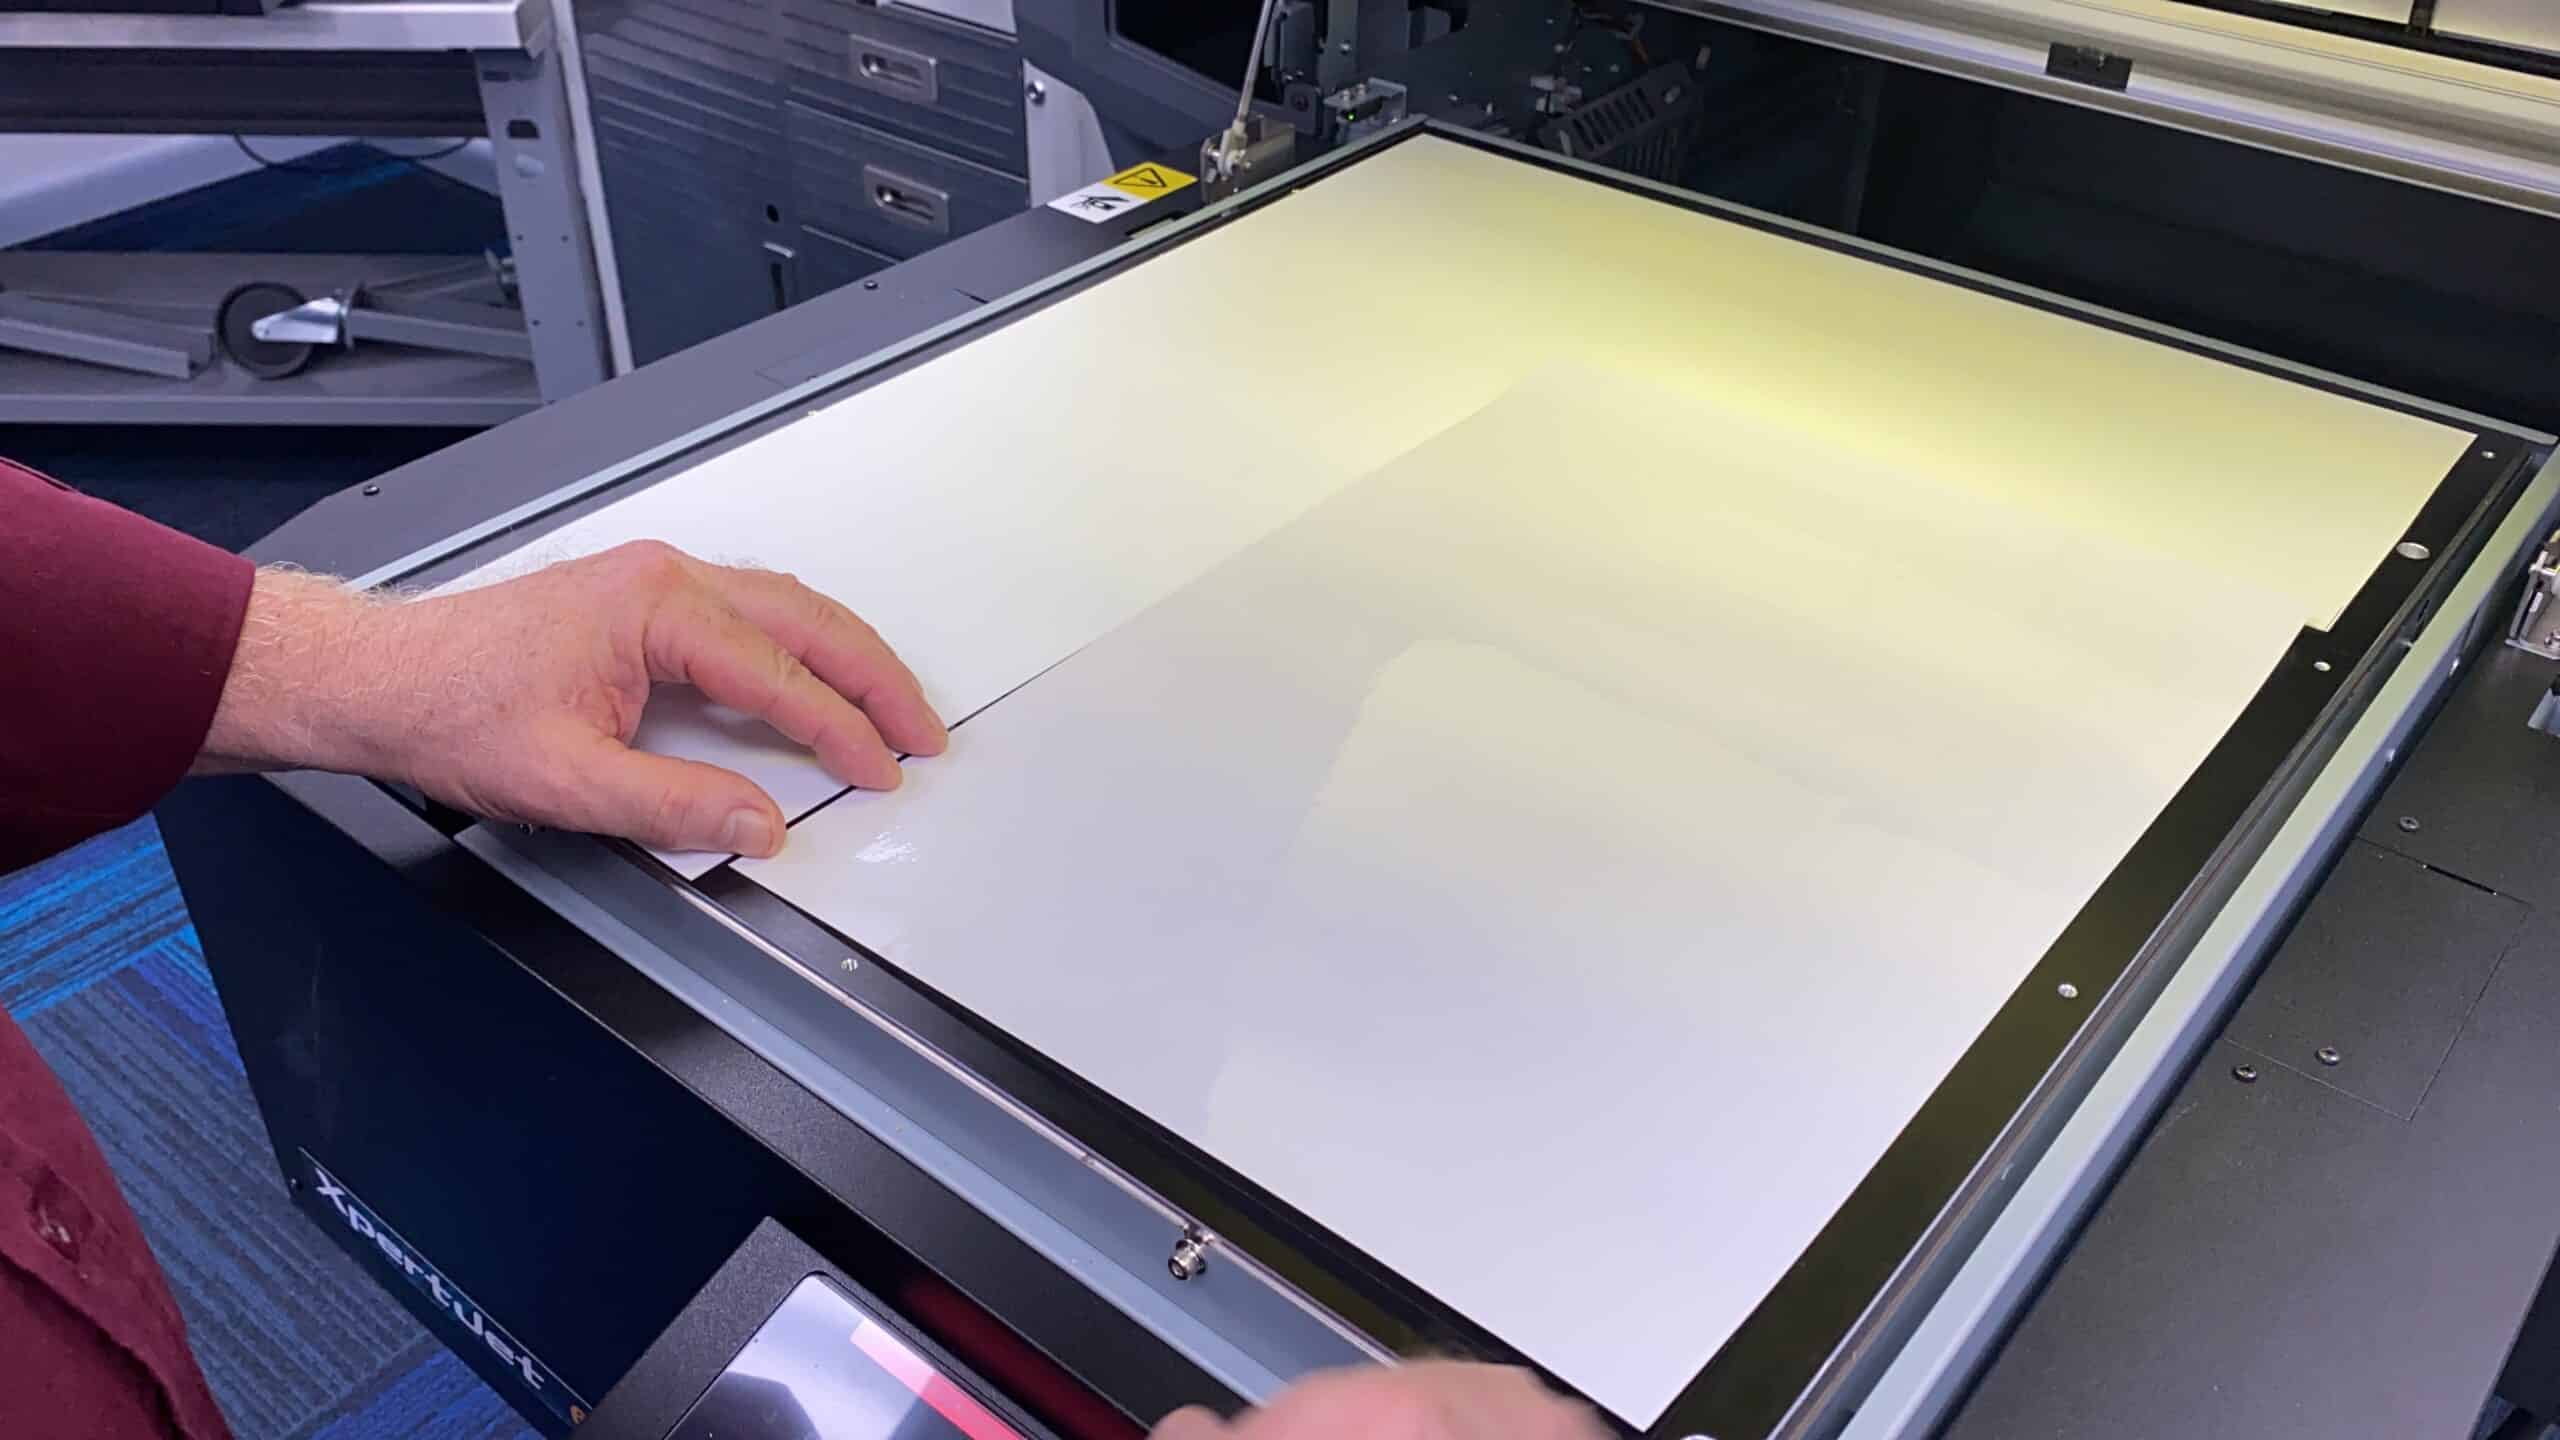 UV, DTF, and UV DTF Printing Explained - Alibaba.com Reads